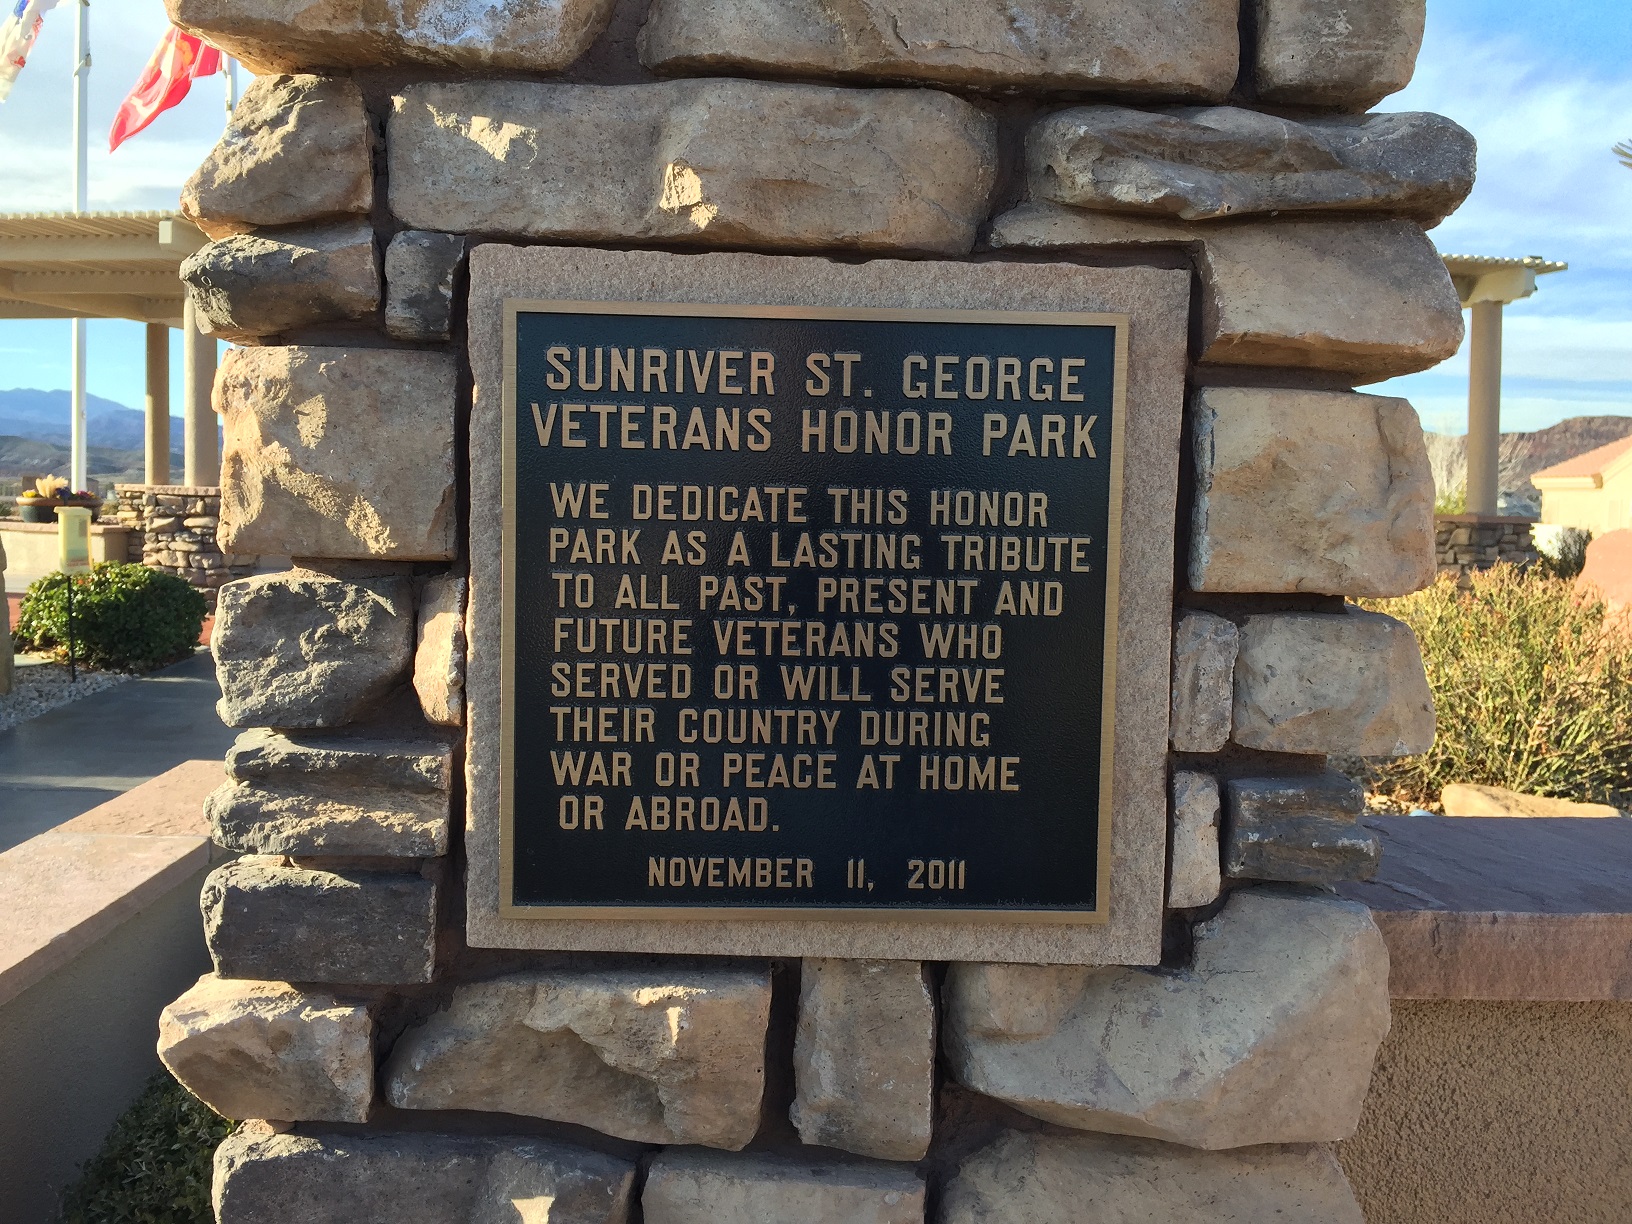 The name and dedication plaque at the SunRiver St. George Veterans Honor Park